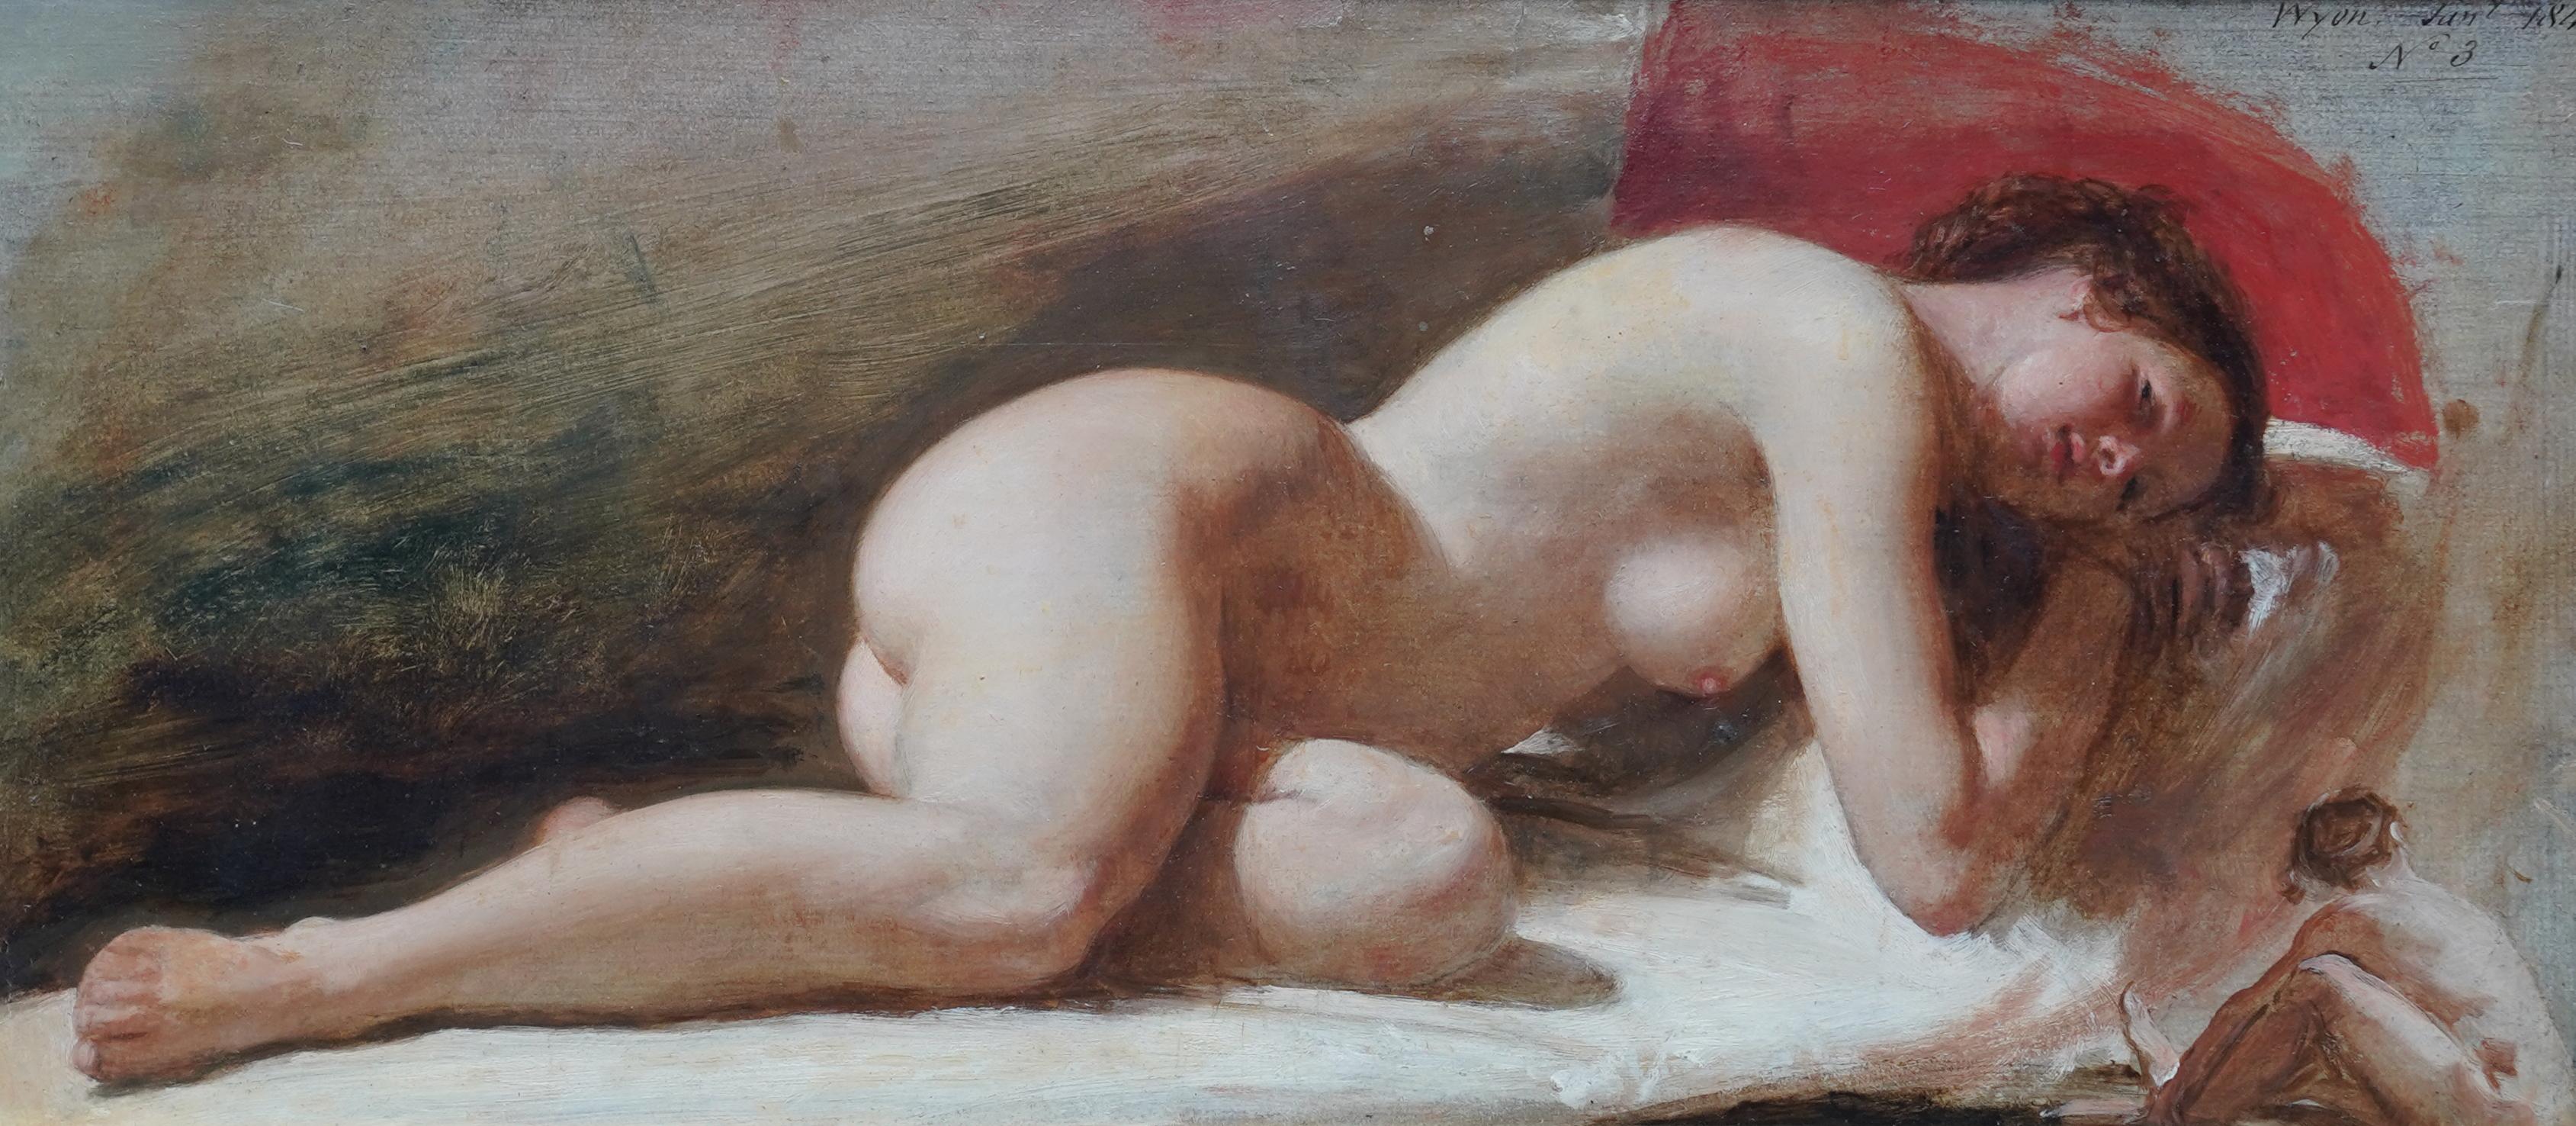 Reclining Nude Female Portrait - British 19th century Victorian art oil painting - Painting by Edward William Wyon